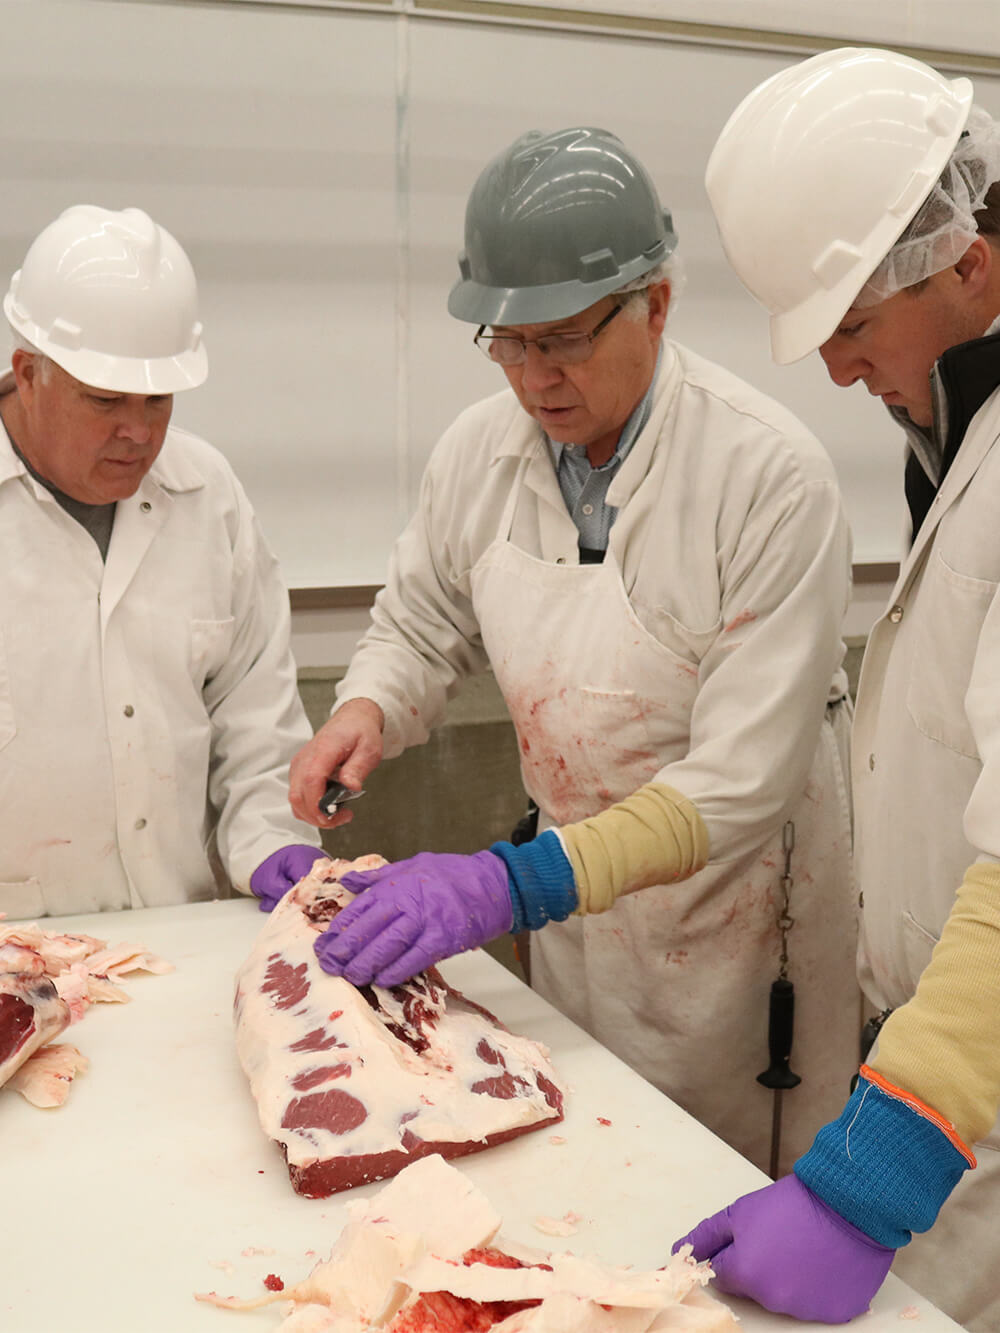 Three men in white butchers attire and hardhats cut large slab of meat